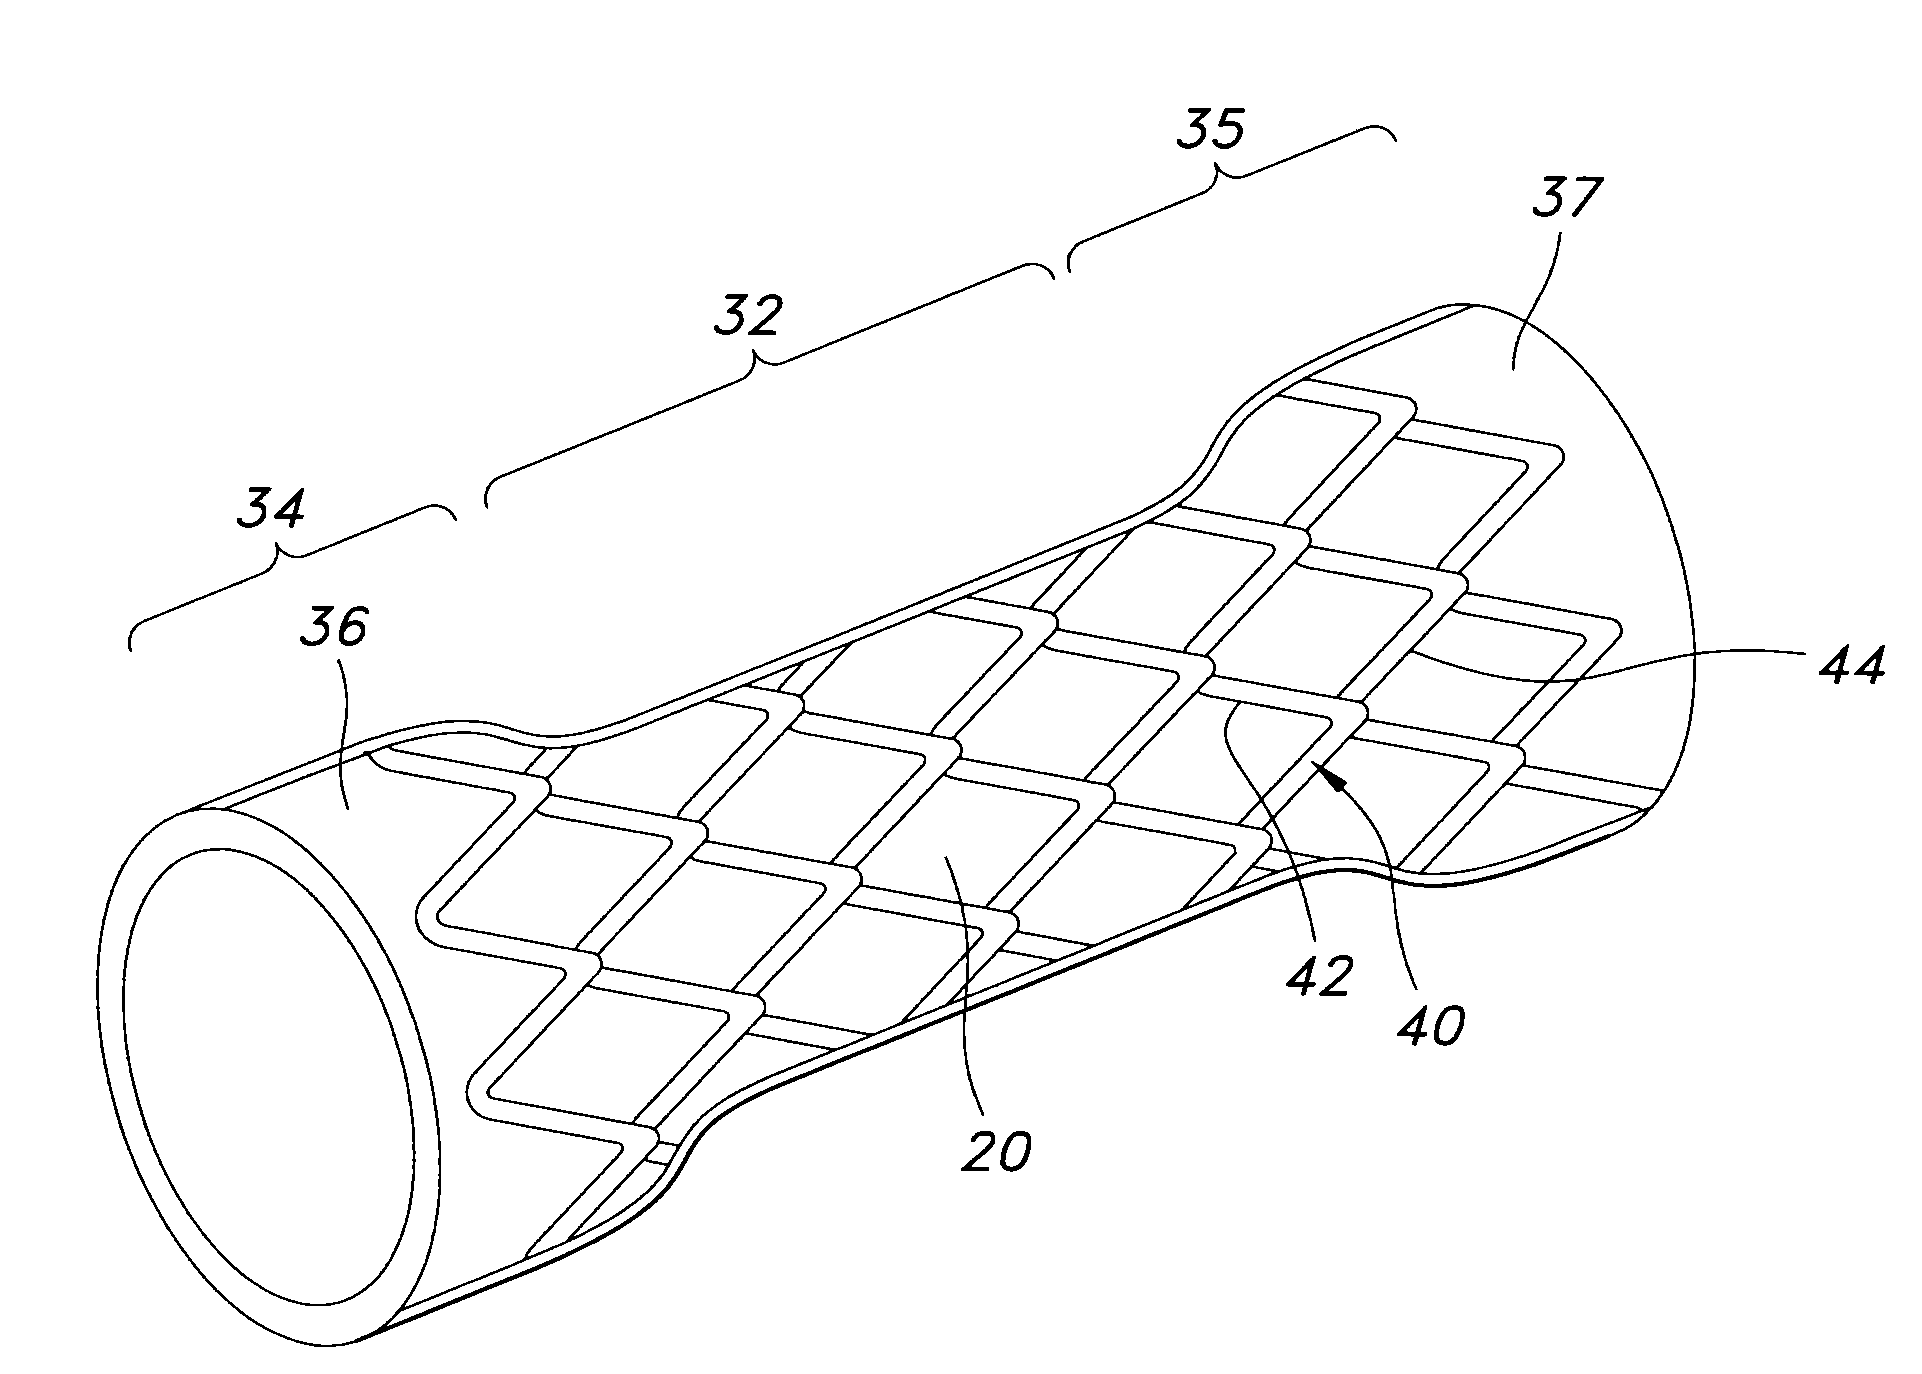 Stent with Anti-migration feature